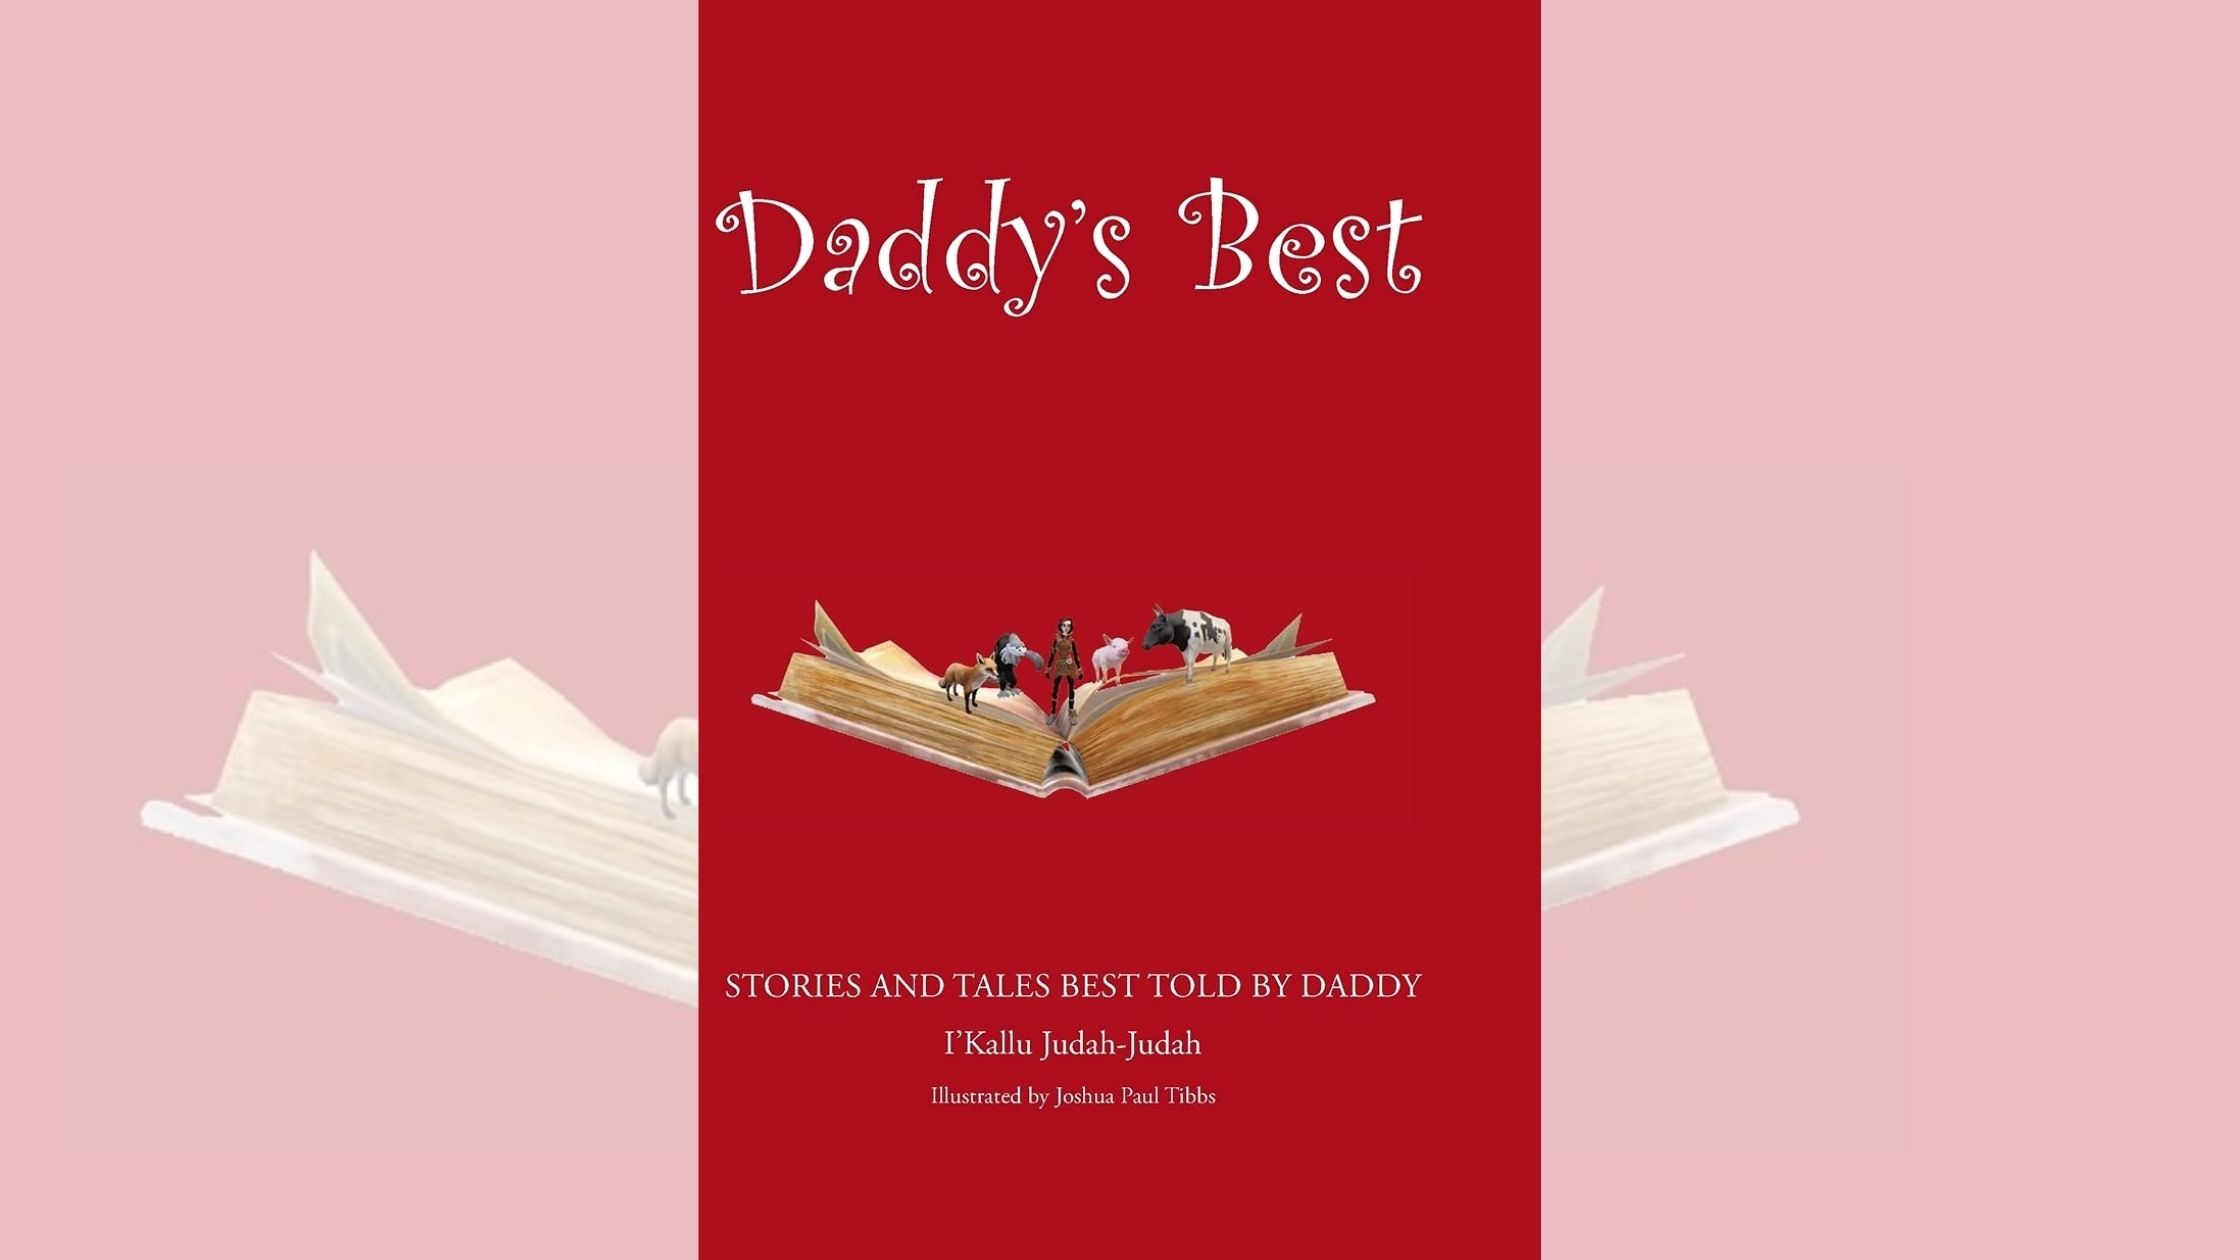 I'Kallu Judah-Judah’s newly released “Daddy’s Best: Stories and Tales Best Told by Daddy” is a fun-filled collection of stories with important moral lessons